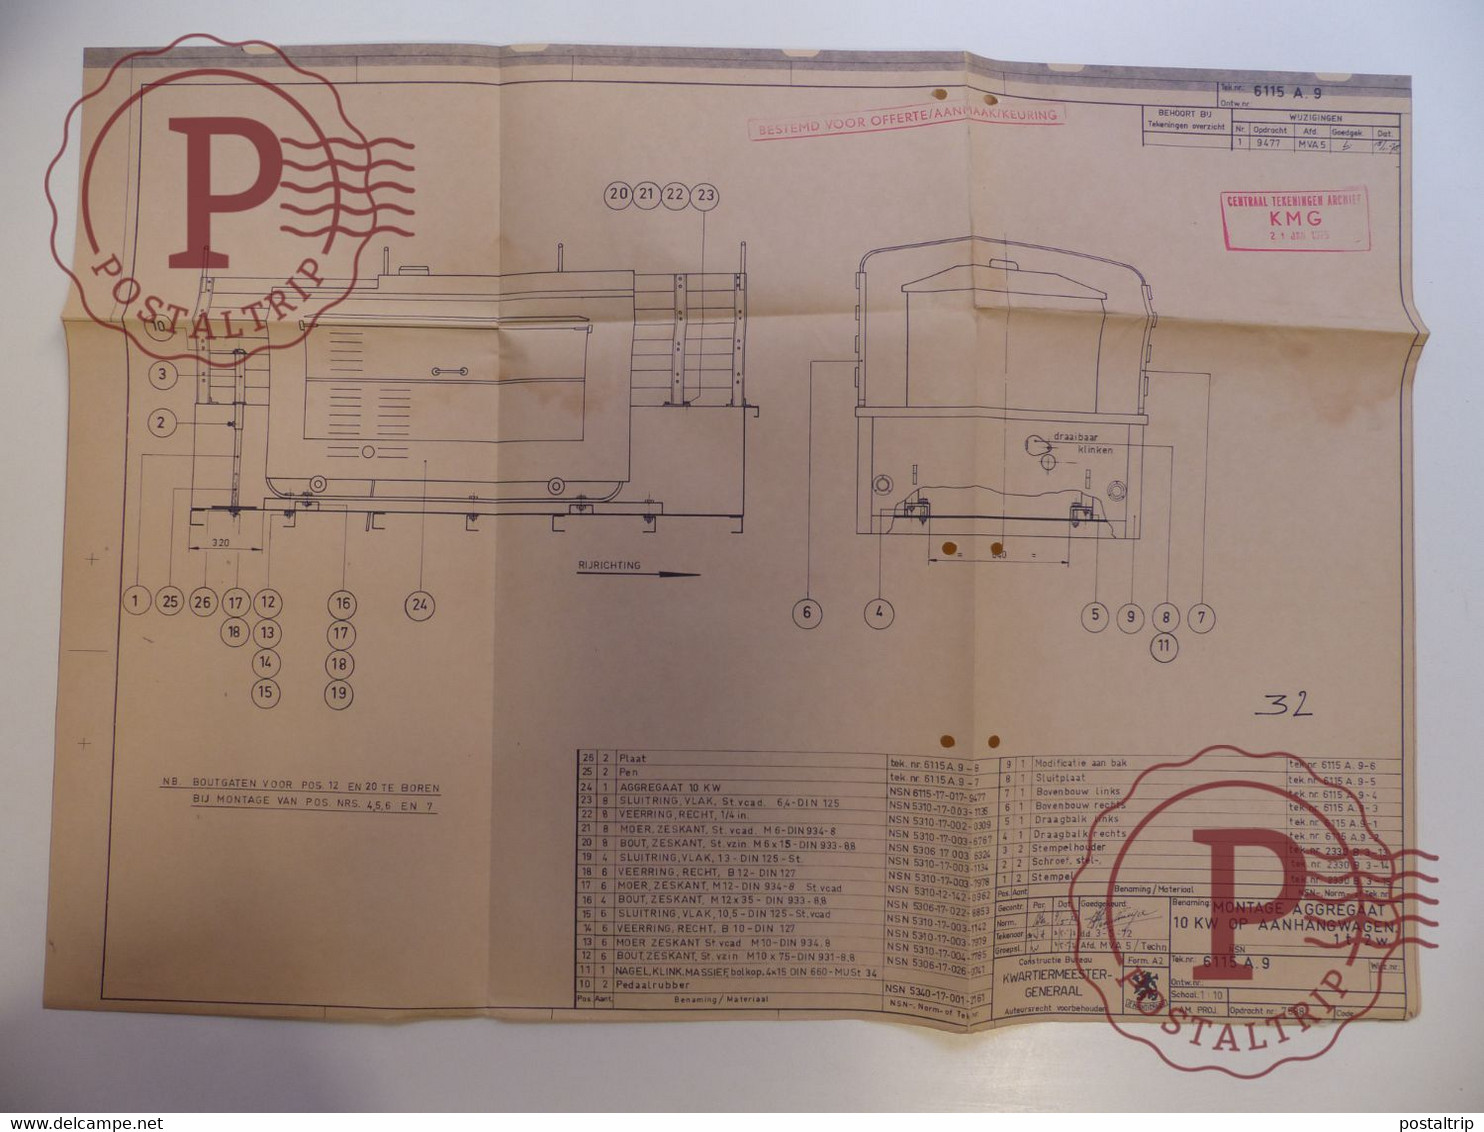 HUEGE LOT (+-35 PRINTS) lot technical drawings of military vehicles and electric circuits, including 'Fahrschulpanzer'